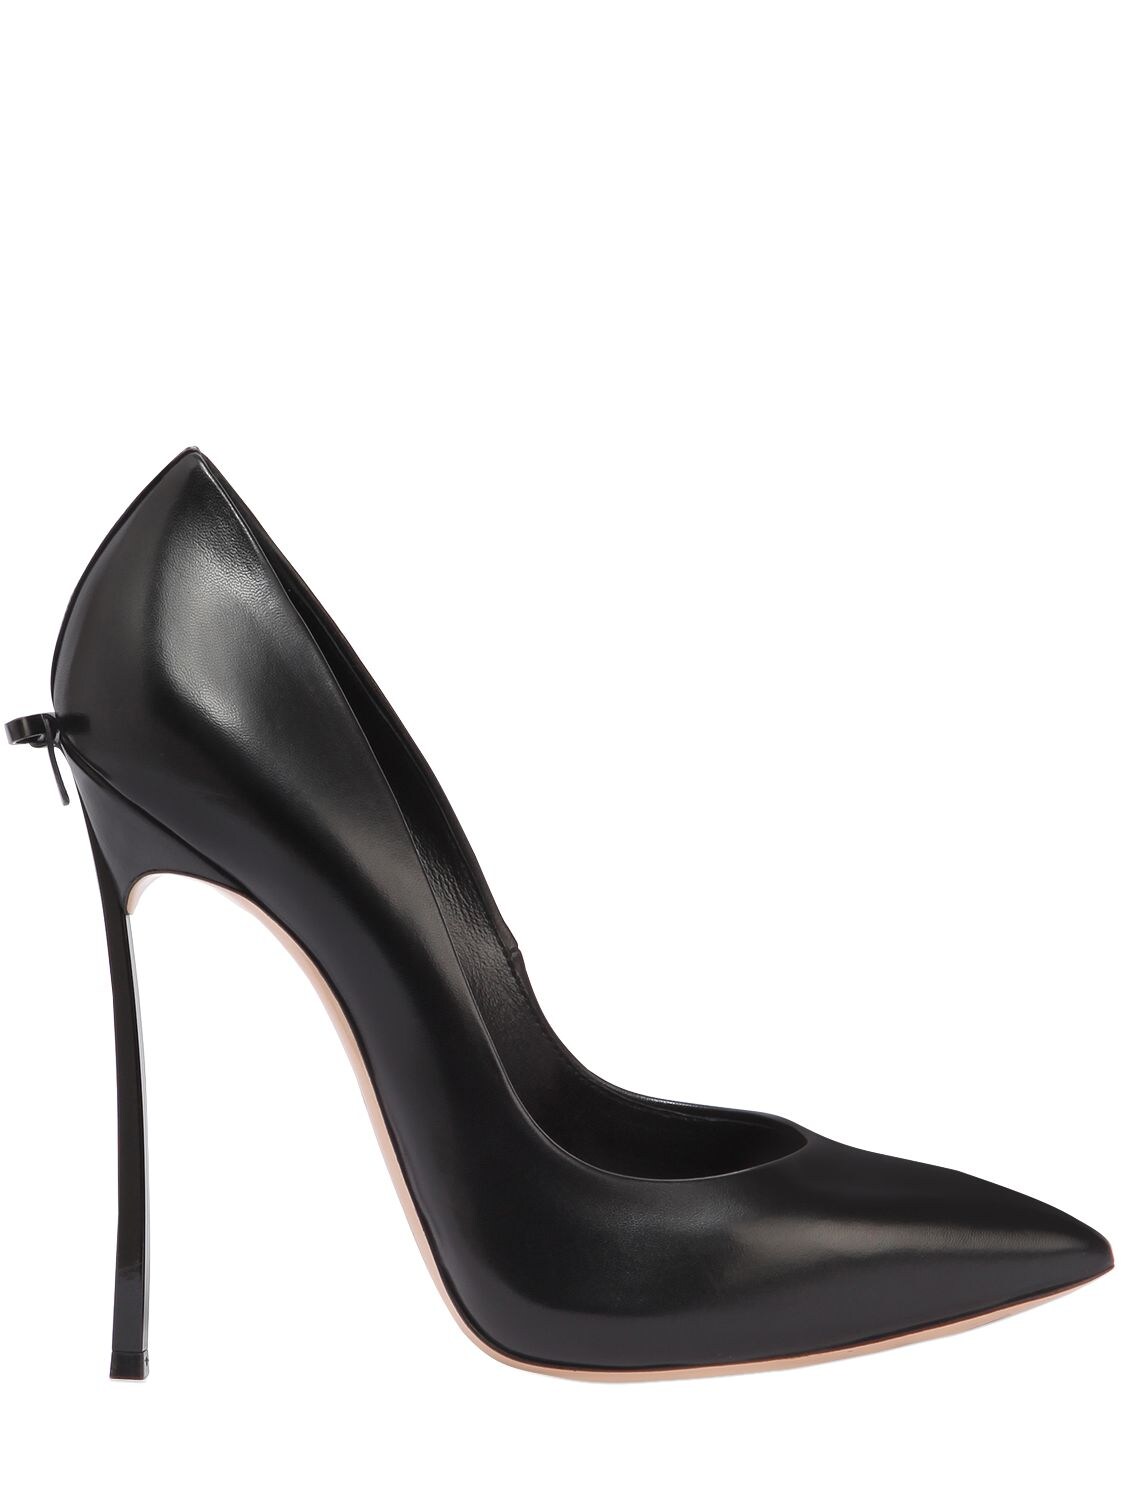 Casadei 120mm Blade Bow Leather Pumps In Black